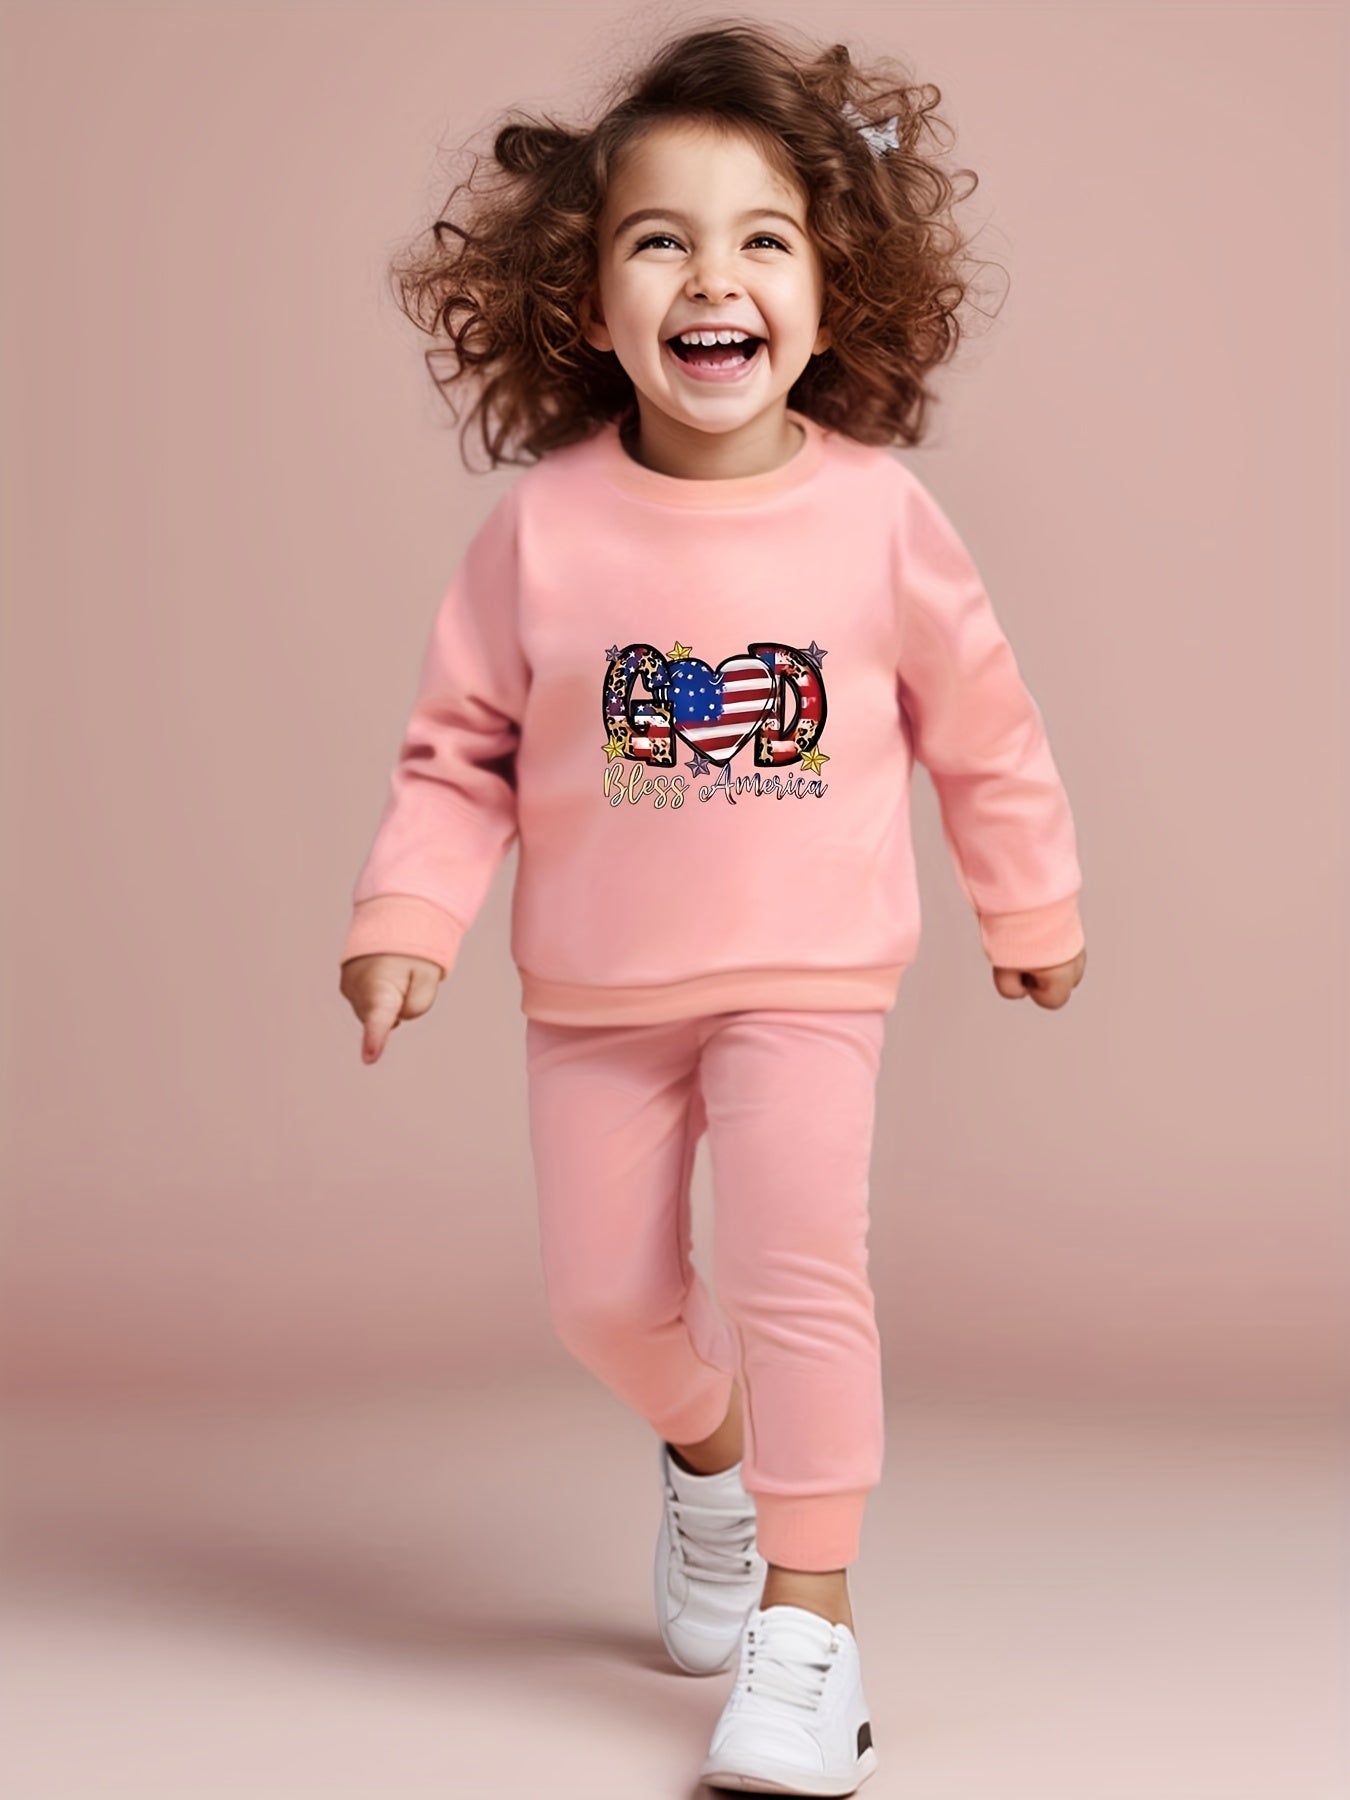 GOD BLESS AMERICA Patriotic American Toddler Christian Casual Outfit claimedbygoddesigns